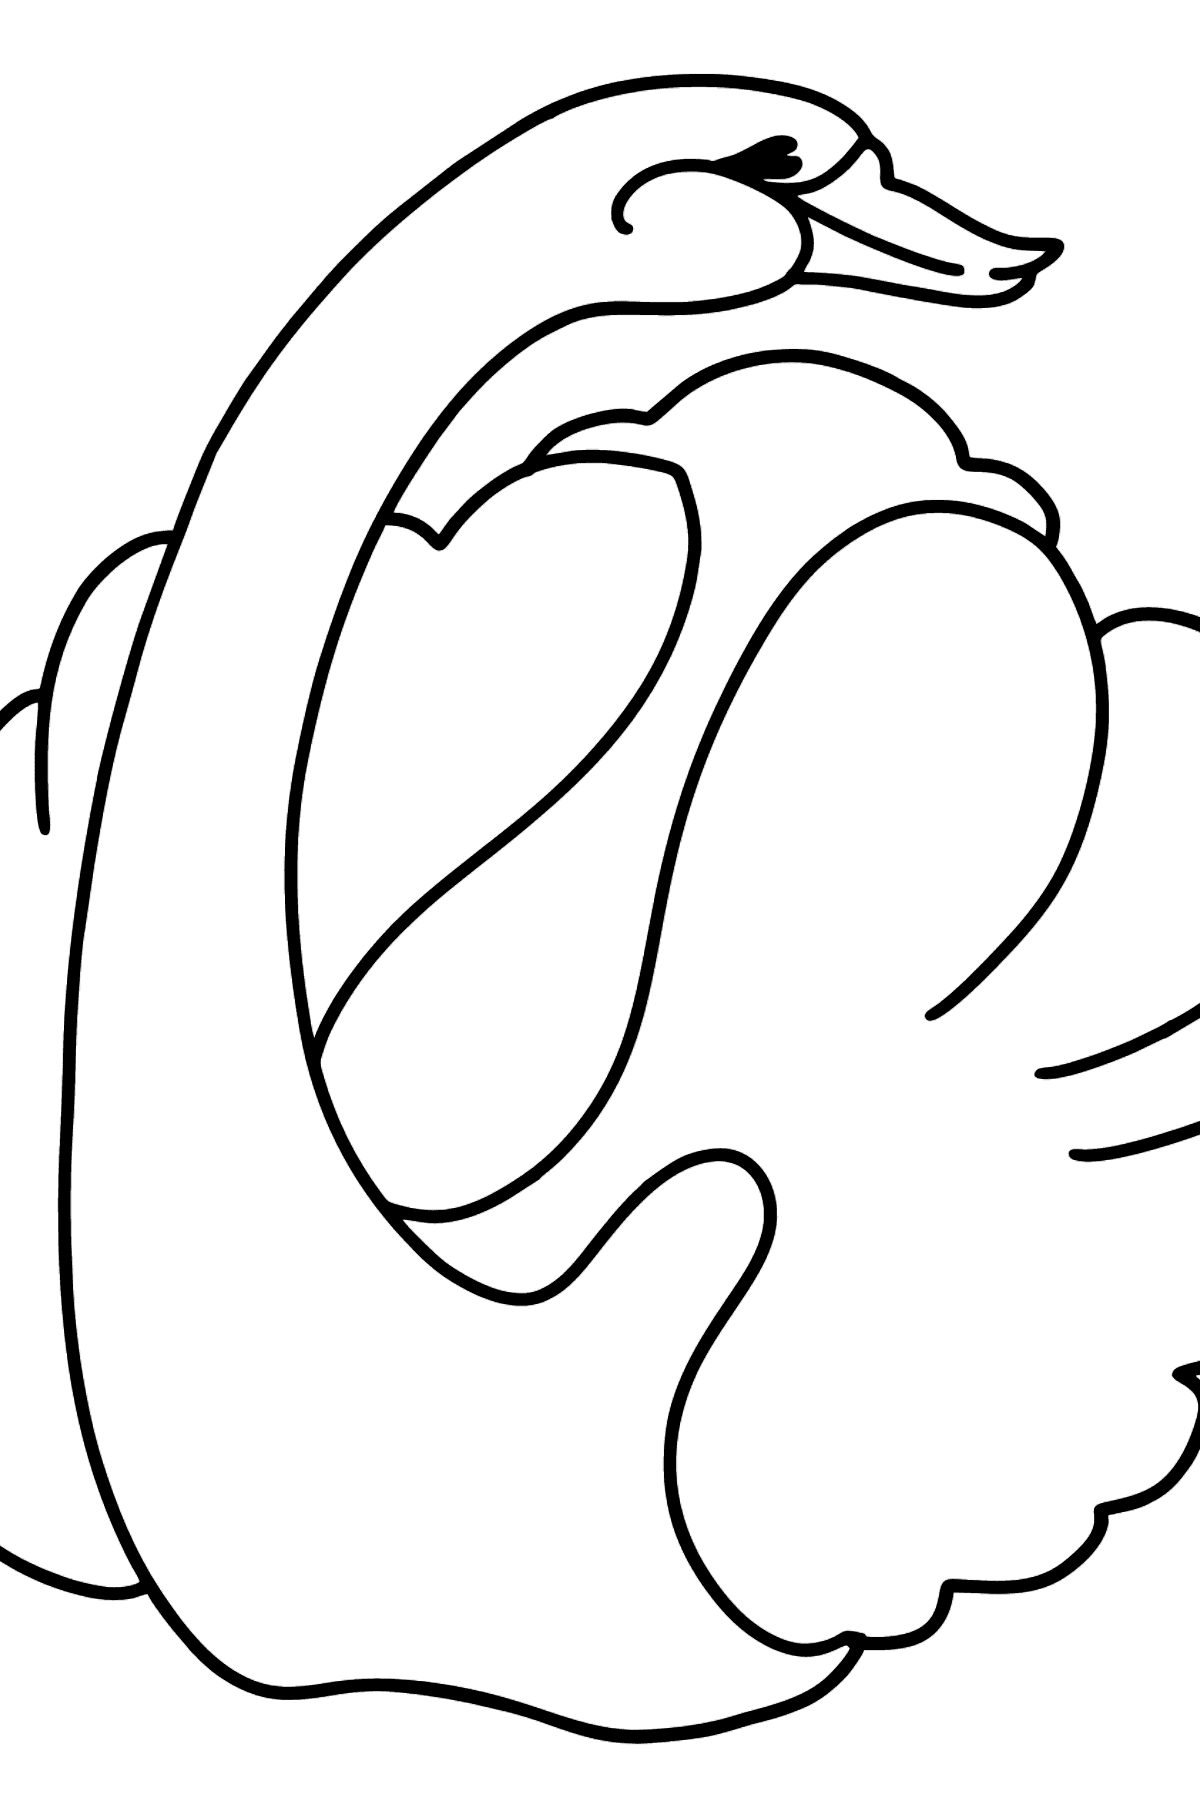 Swan coloring page - Coloring Pages for Kids